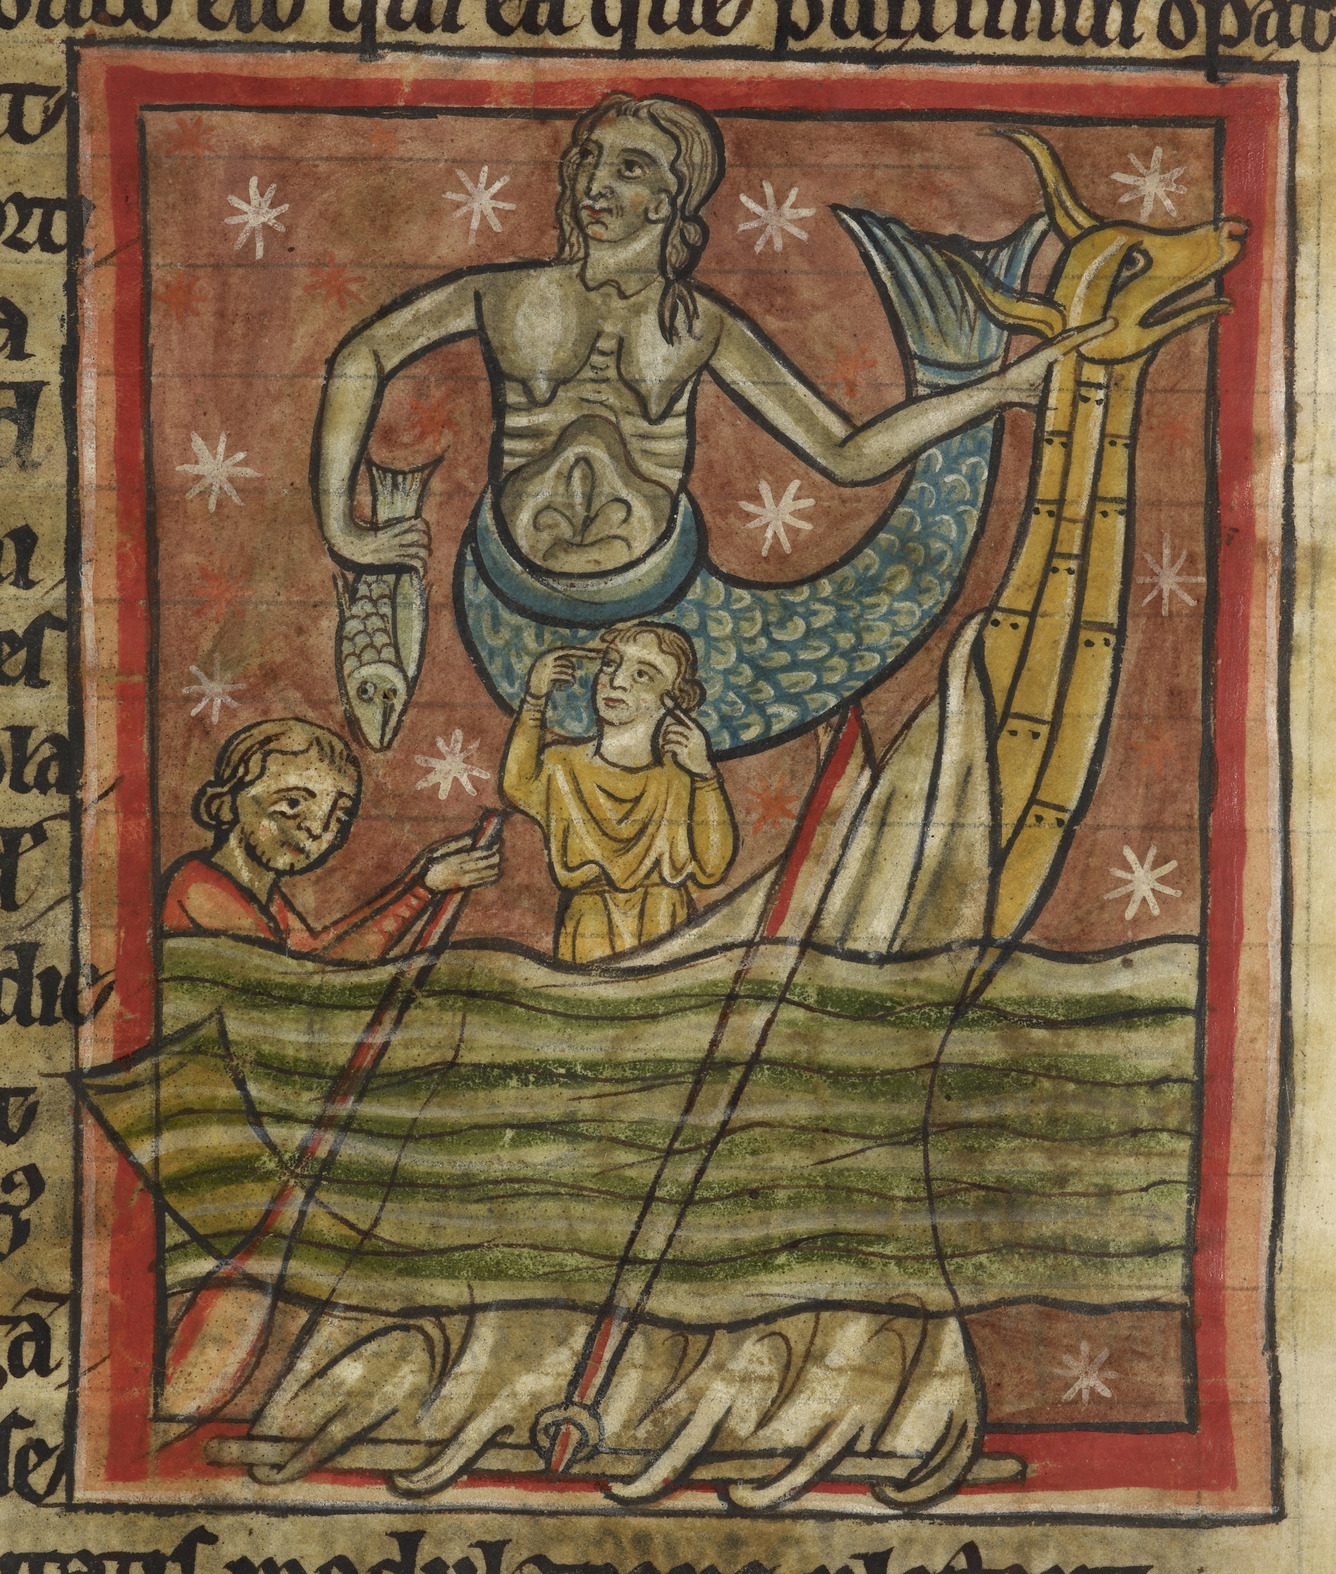 Miniature illustration of a Siren, portrayed with a fish's tail like a mermaid, lulls sailors to sleep with her song. One sailor stops his ears with his fingers to avoid hearing her. From an English bestiary (or bestiarum vocabulum, a compendium of beasts), originally published/produced in England (Salisbury?), 1230-1240. Held and digitized by the British Library, London, England. 